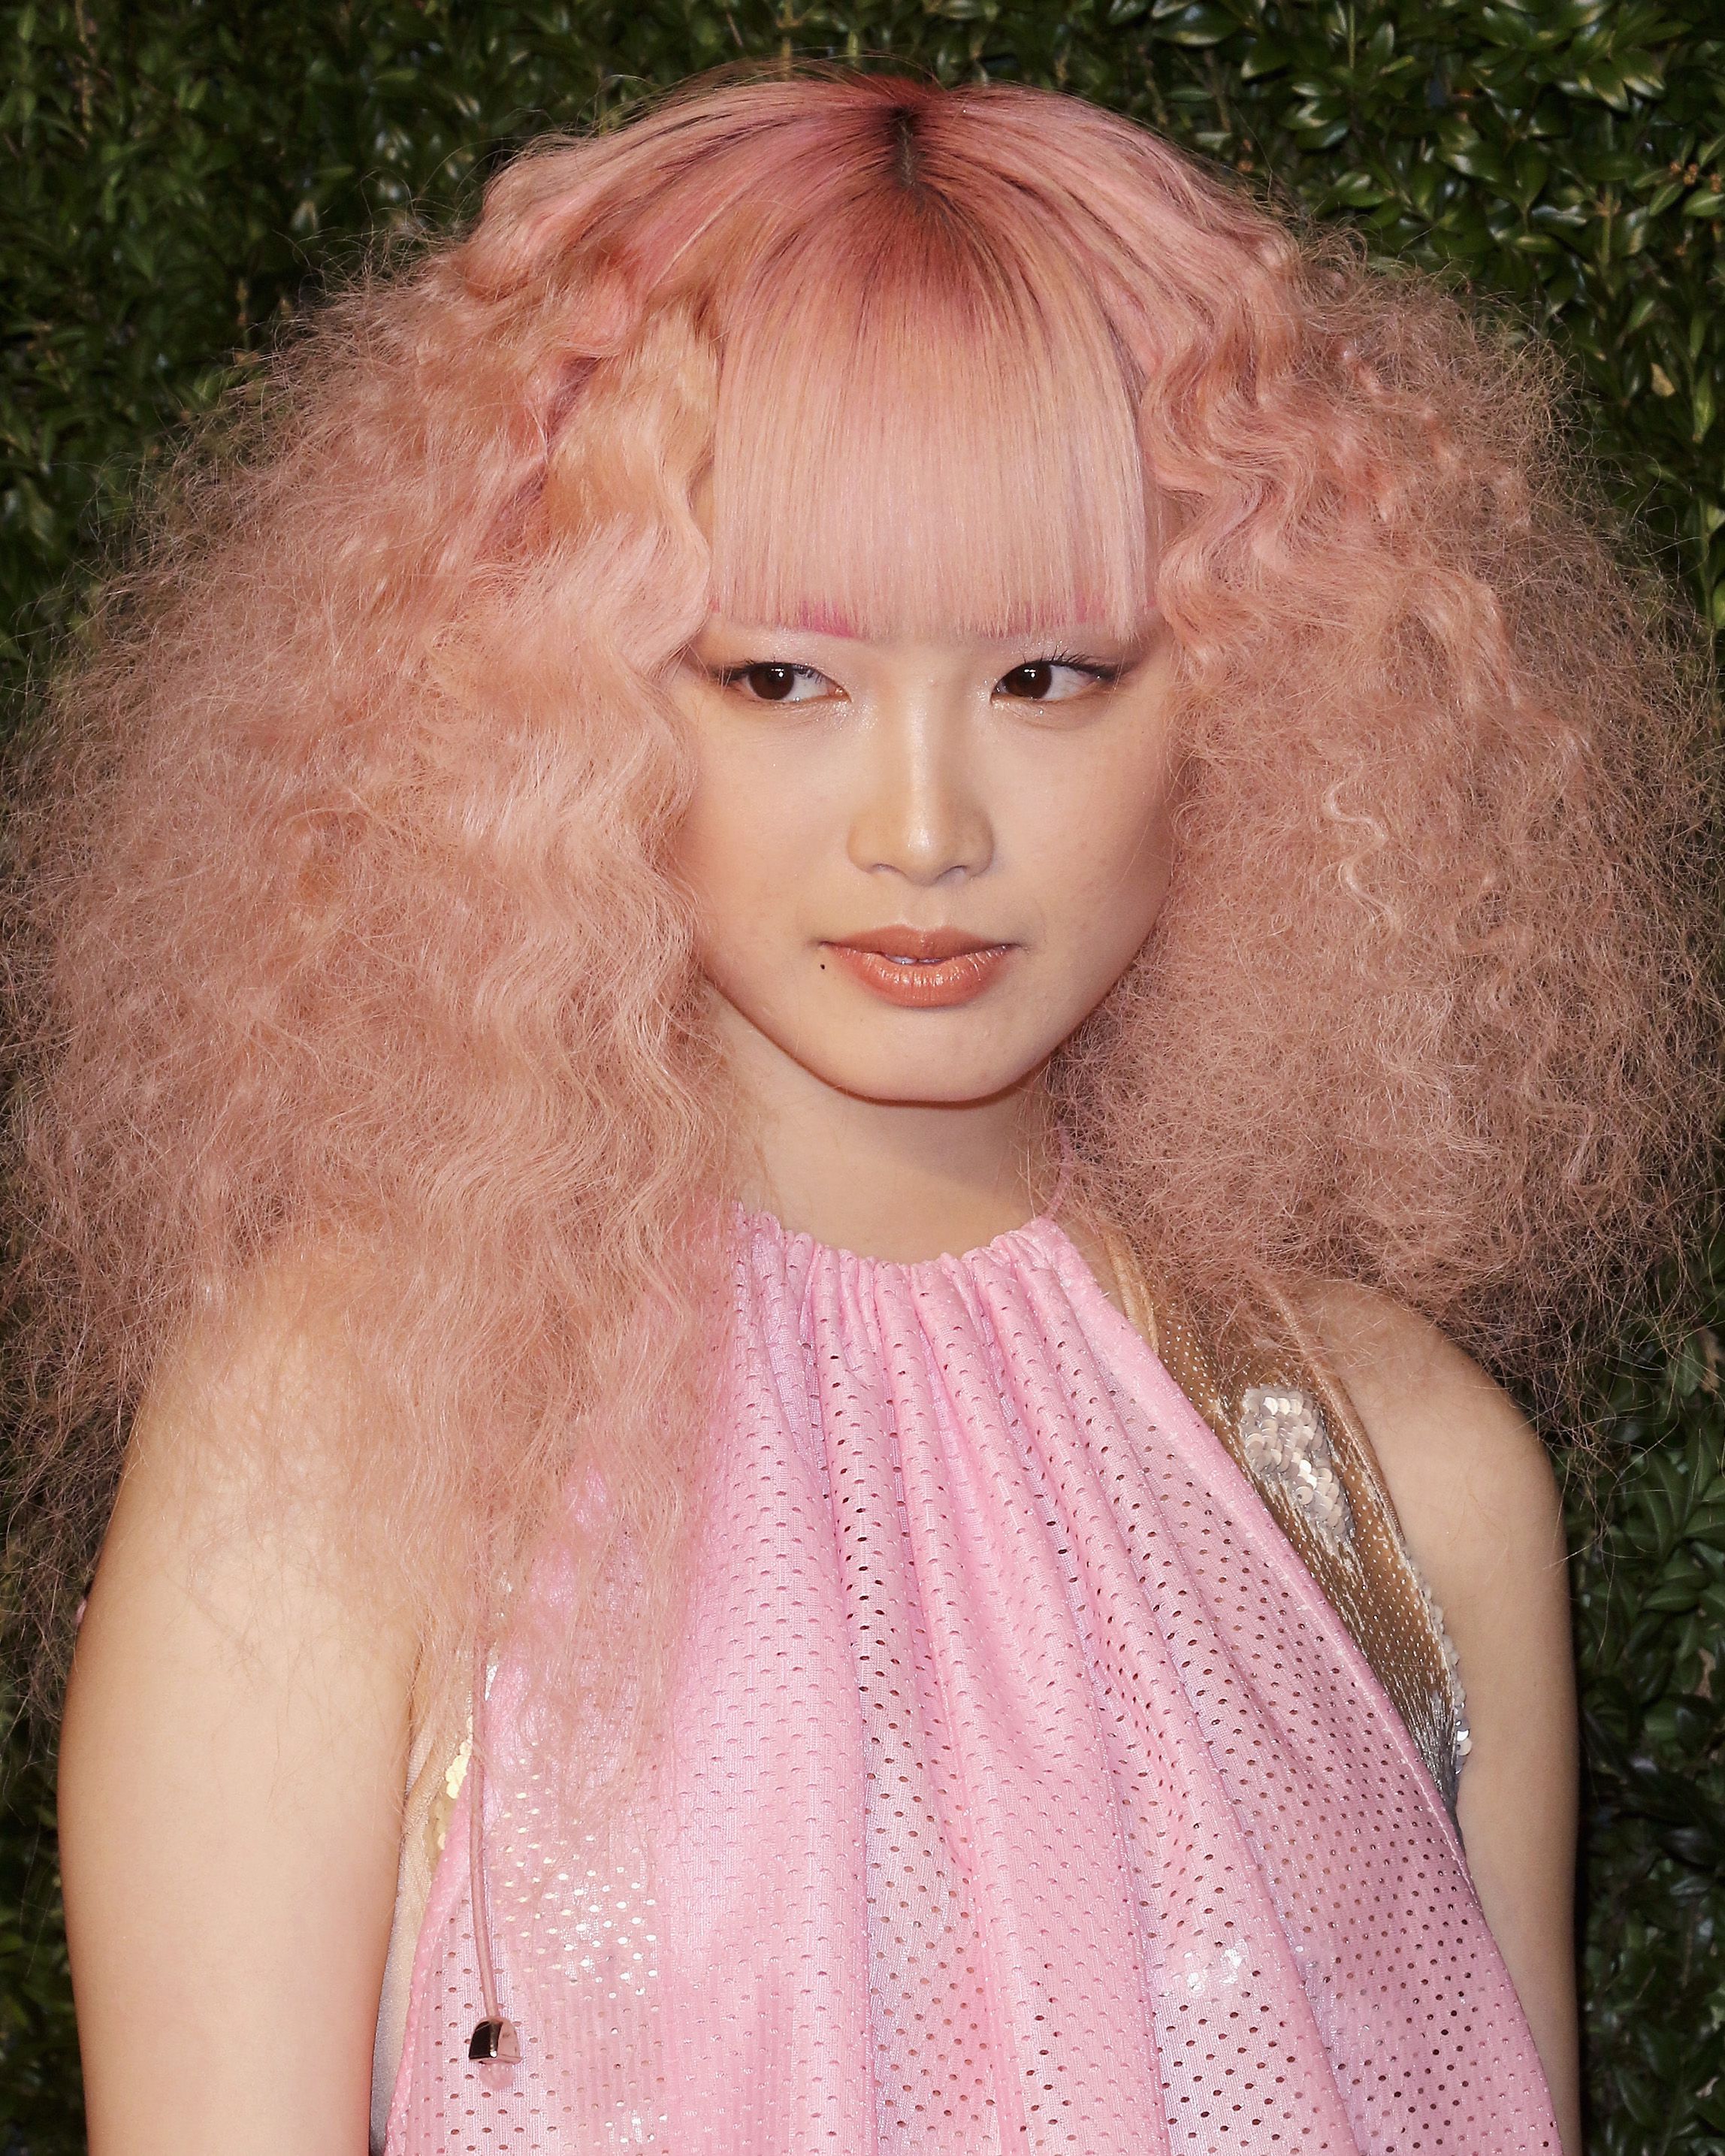 11 Pastel Pink Hair Pics For Your Next Candyfloss-Coloured 'Do